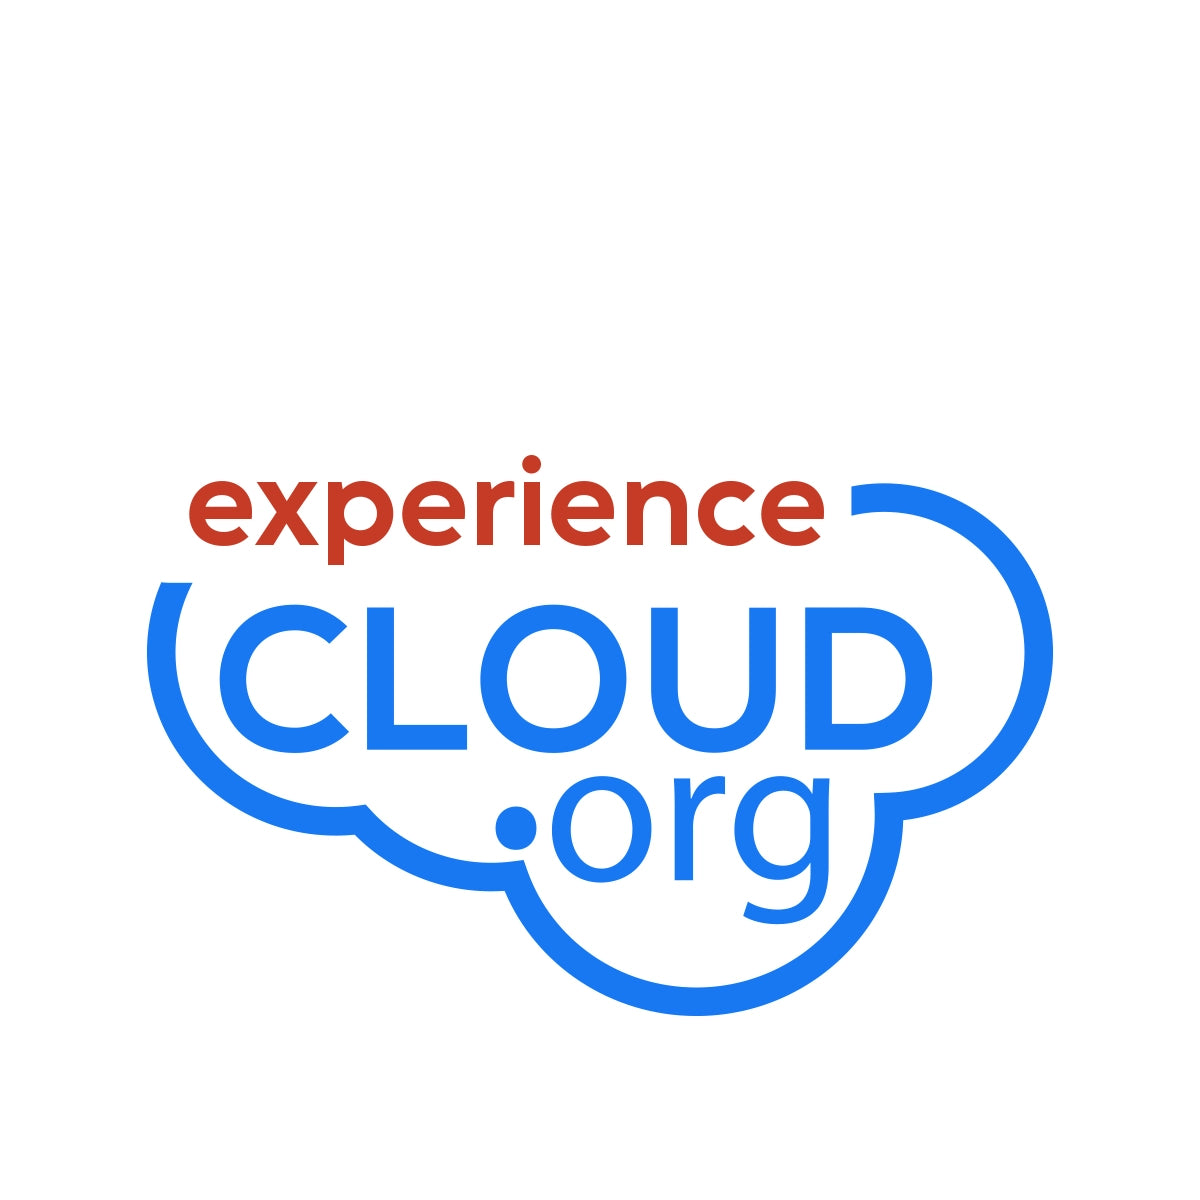 experiencecloud.org